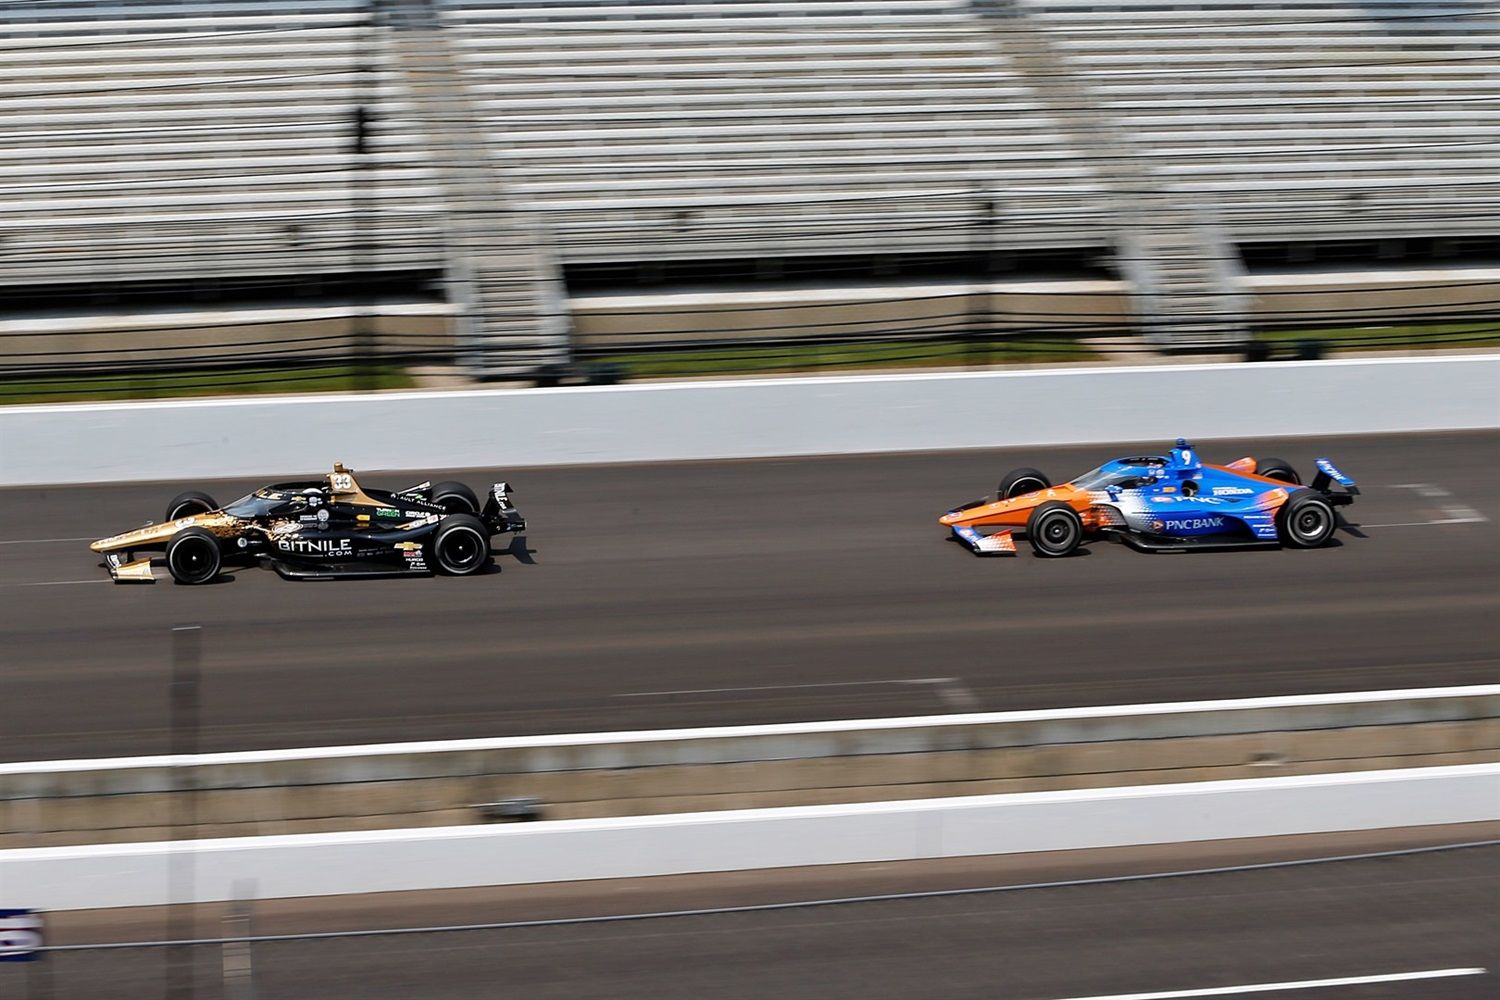 Two race cars speeding on the Indianapolis Motor Speedway track.